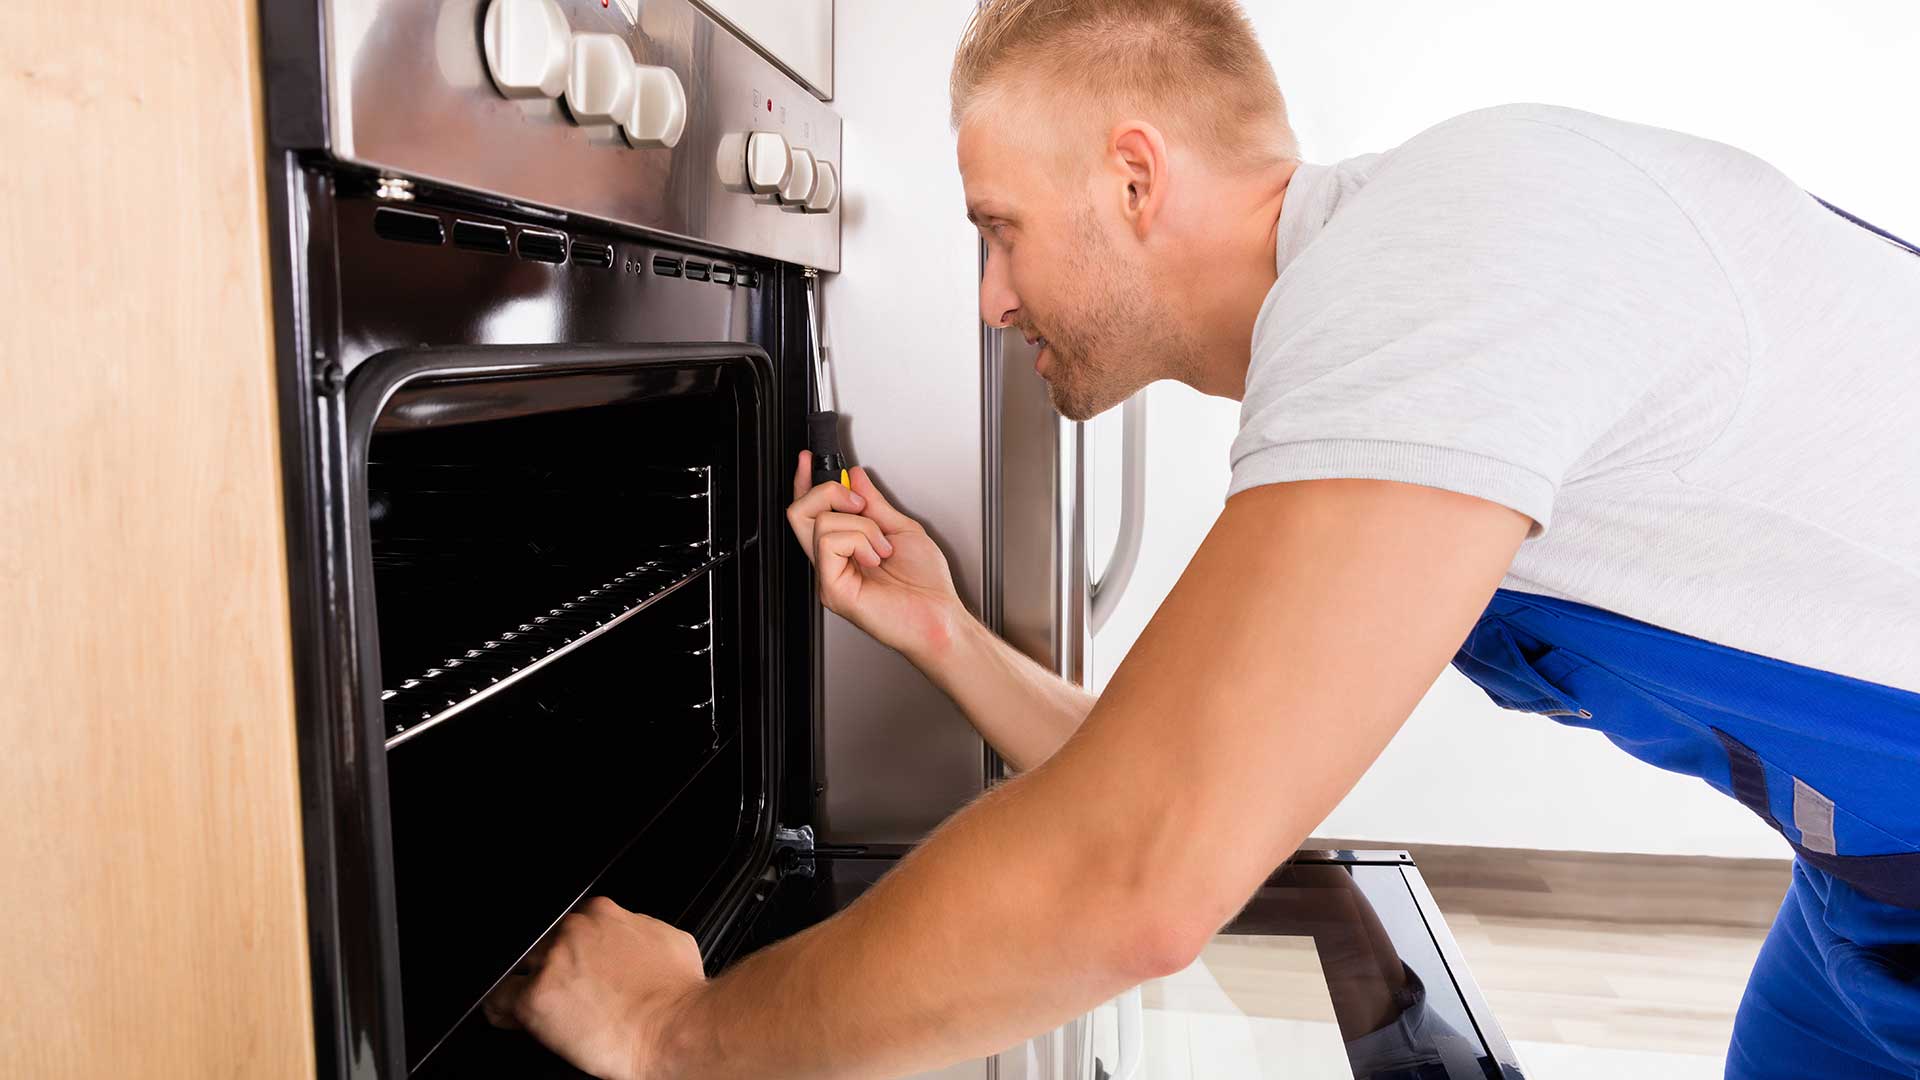 Oven Repair Dubai Gas And Electricity With The Expert Team